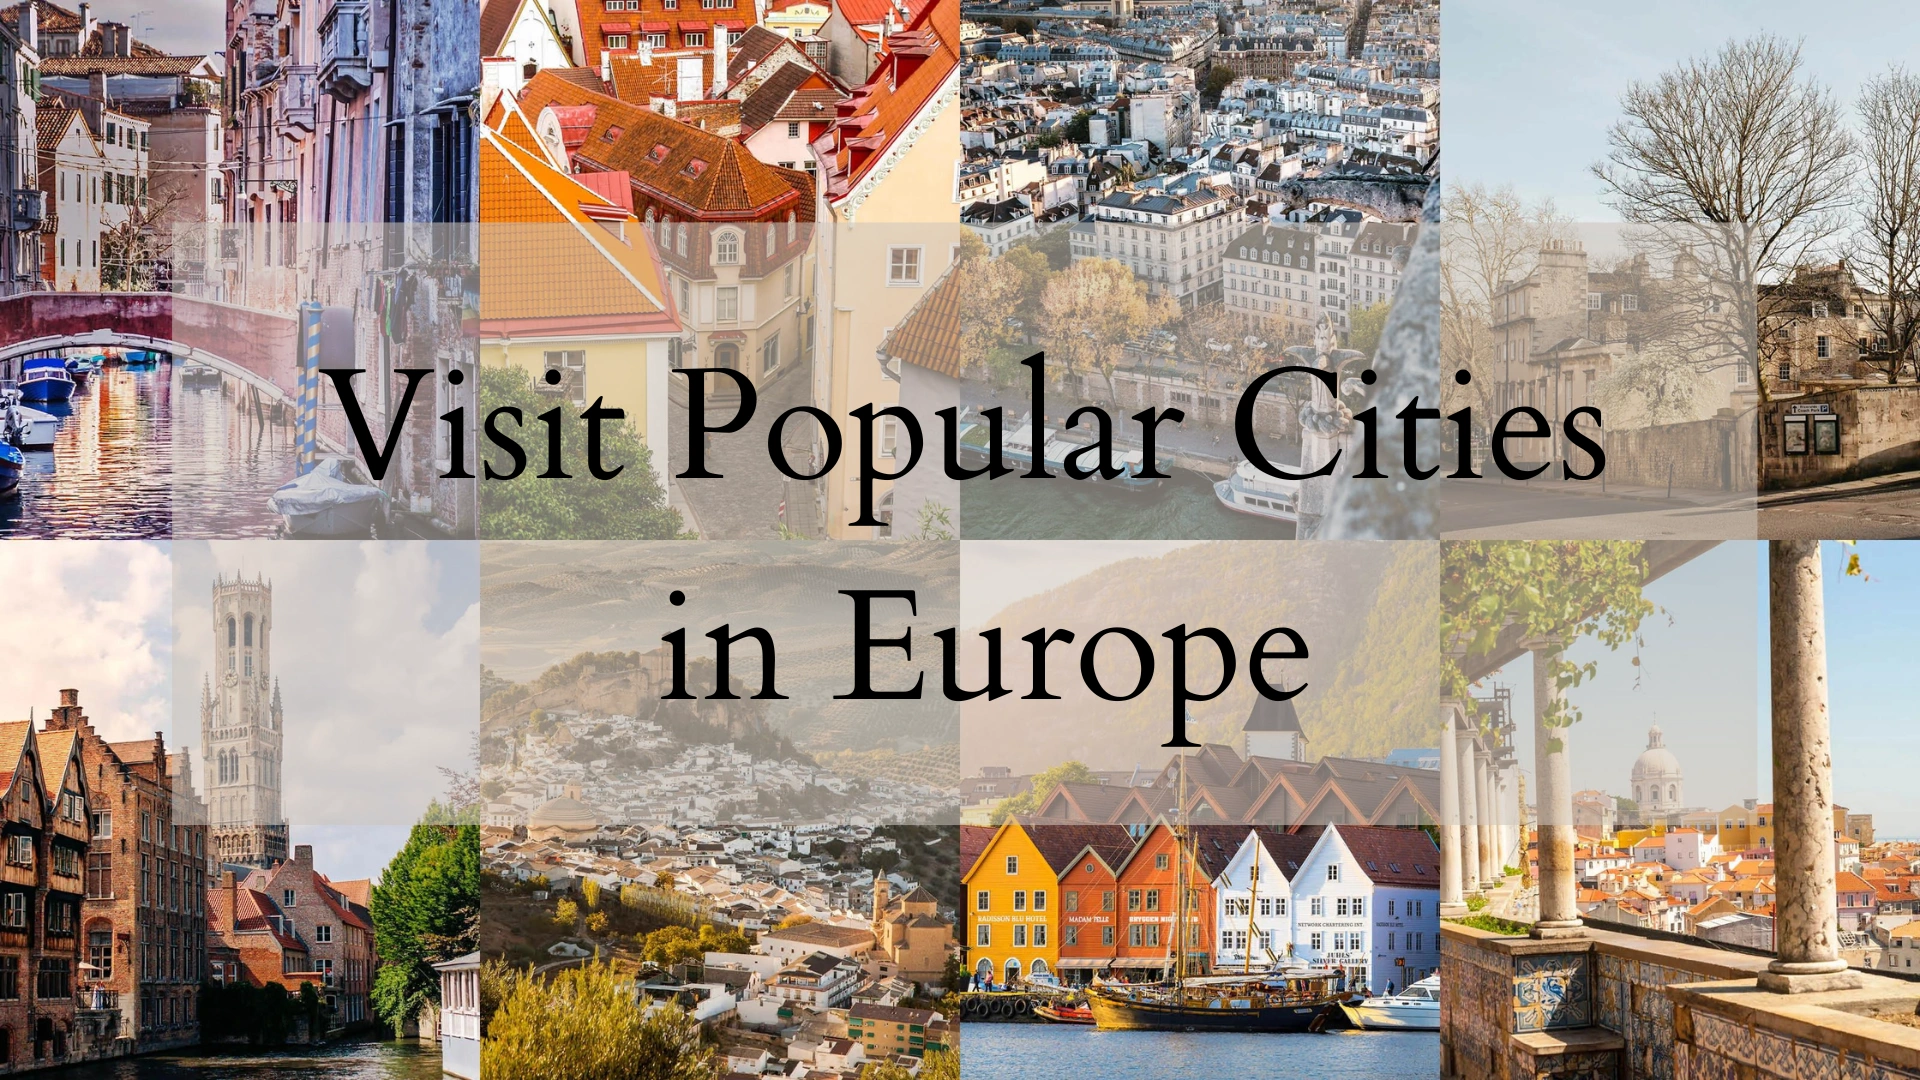 The 5 Most Popular City Destinations in Europe